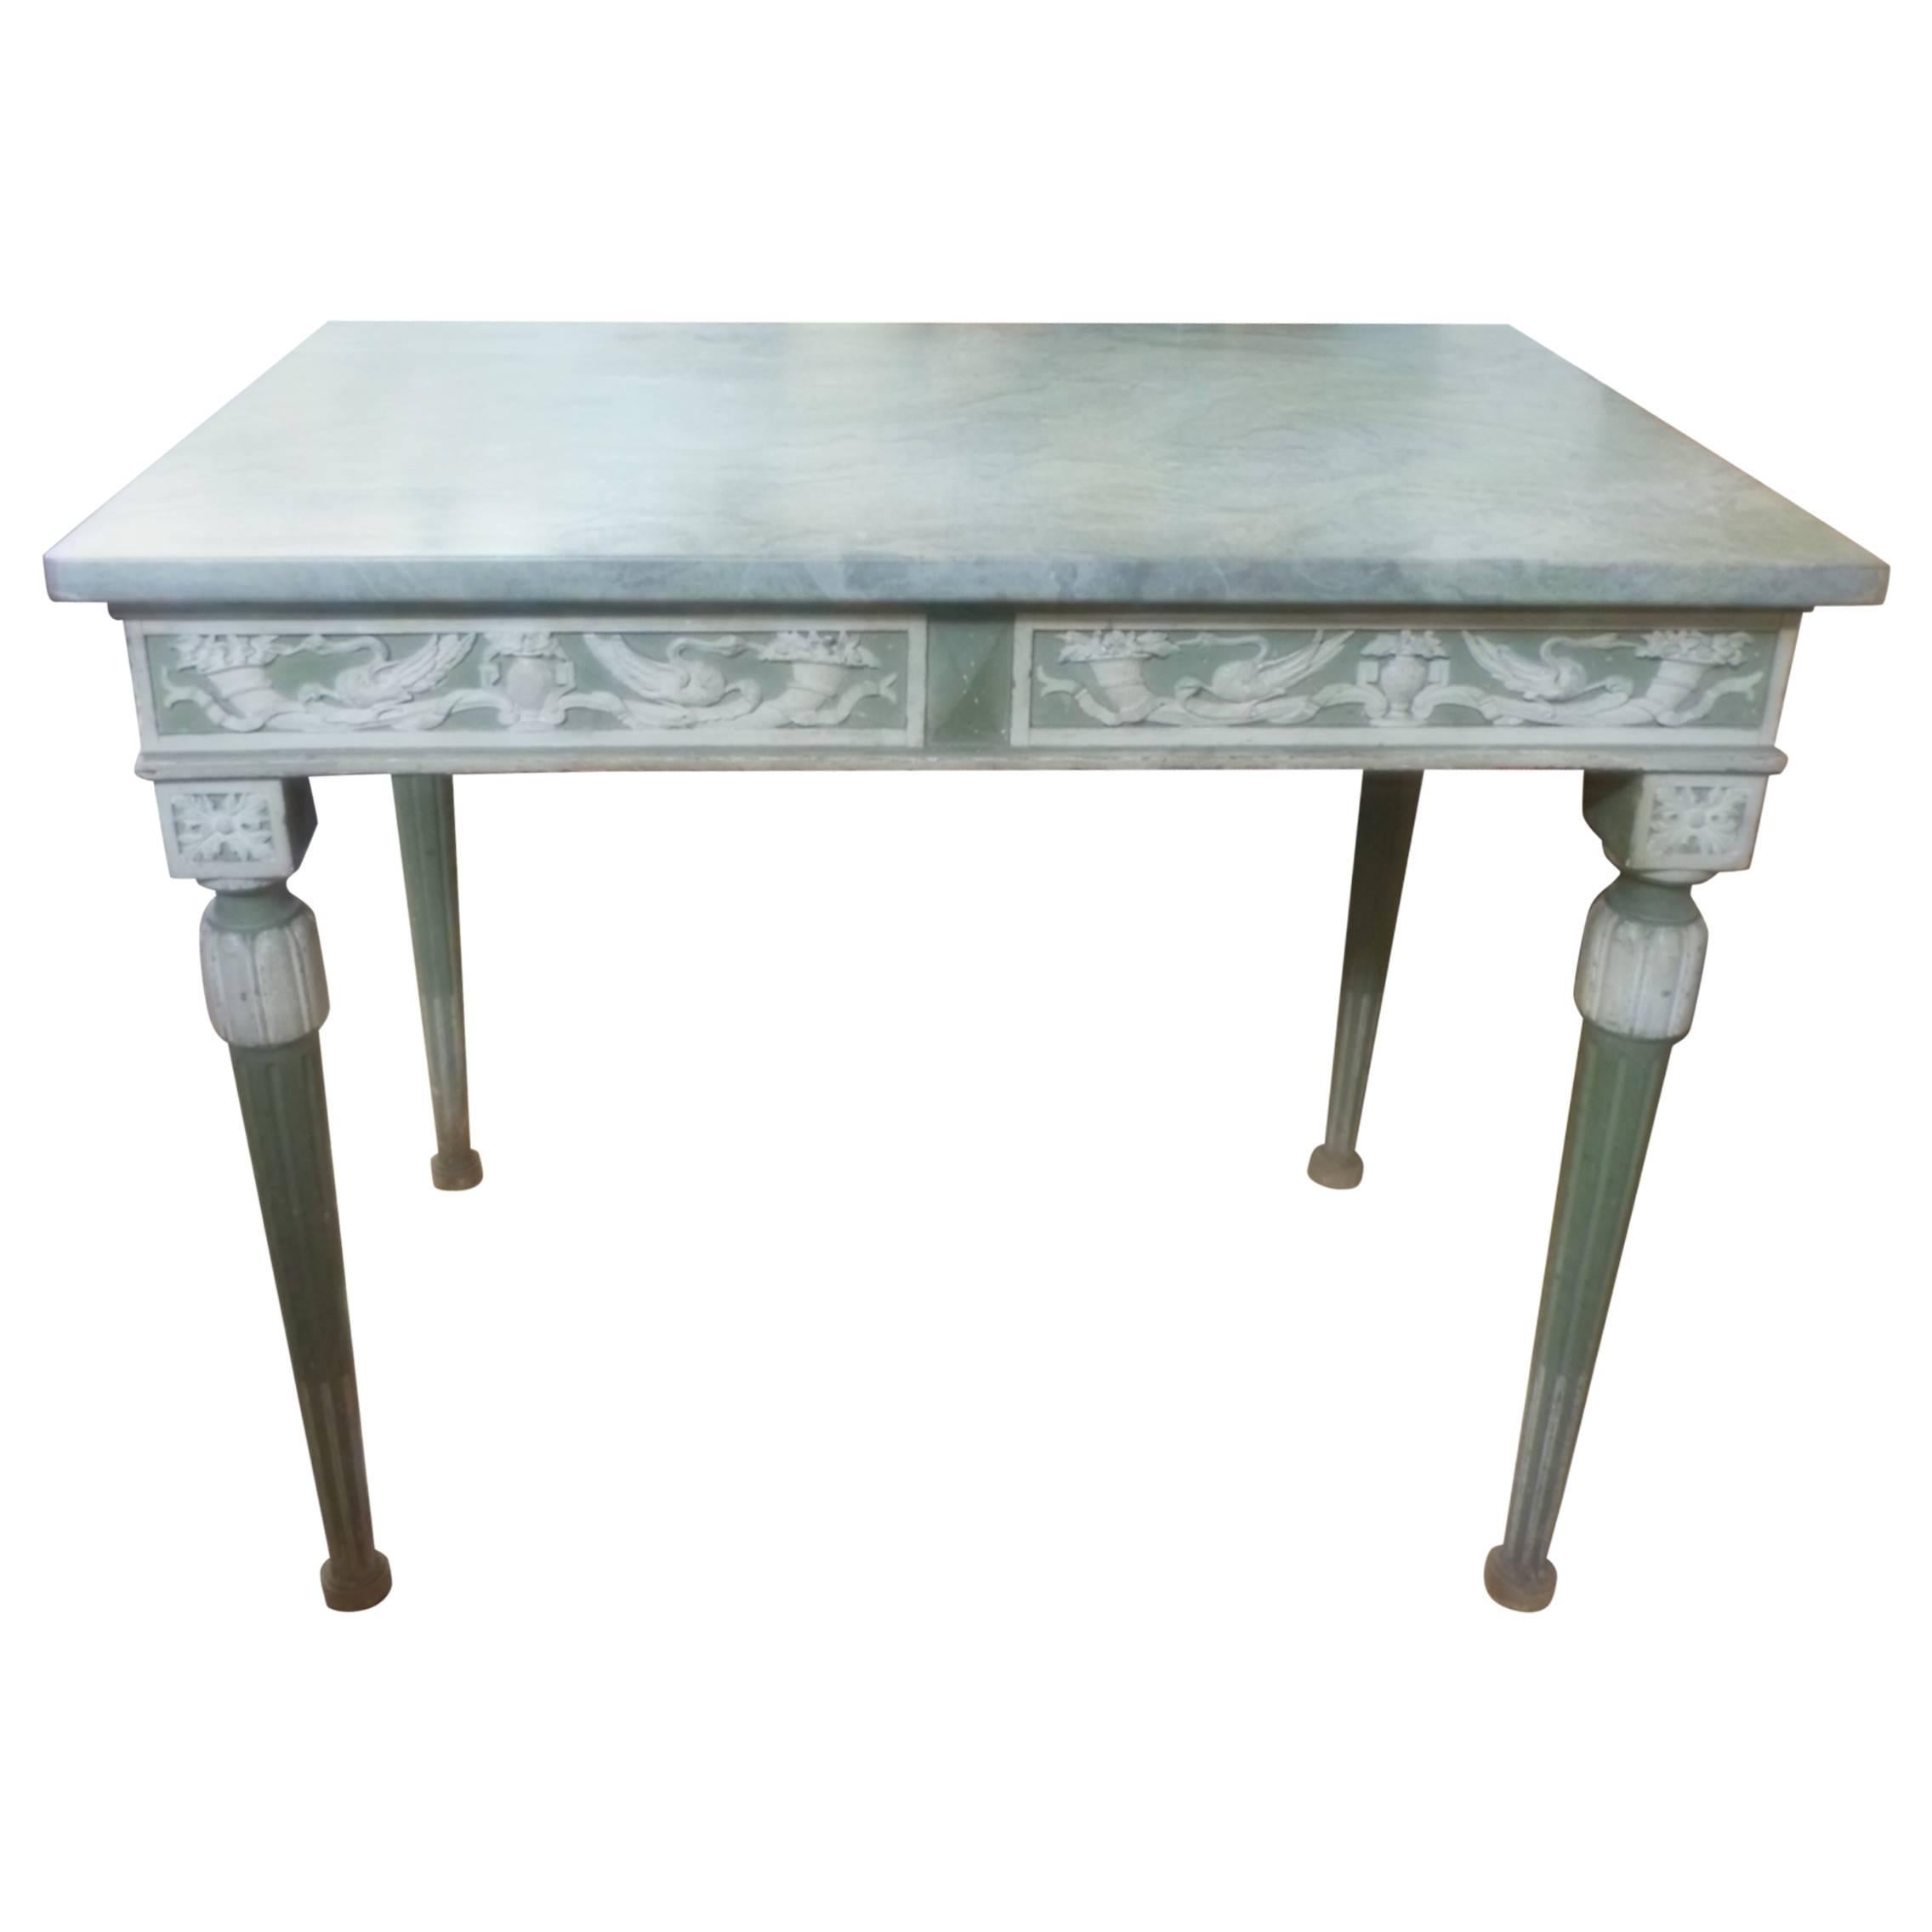 Decorative Stone Top Table For Sale